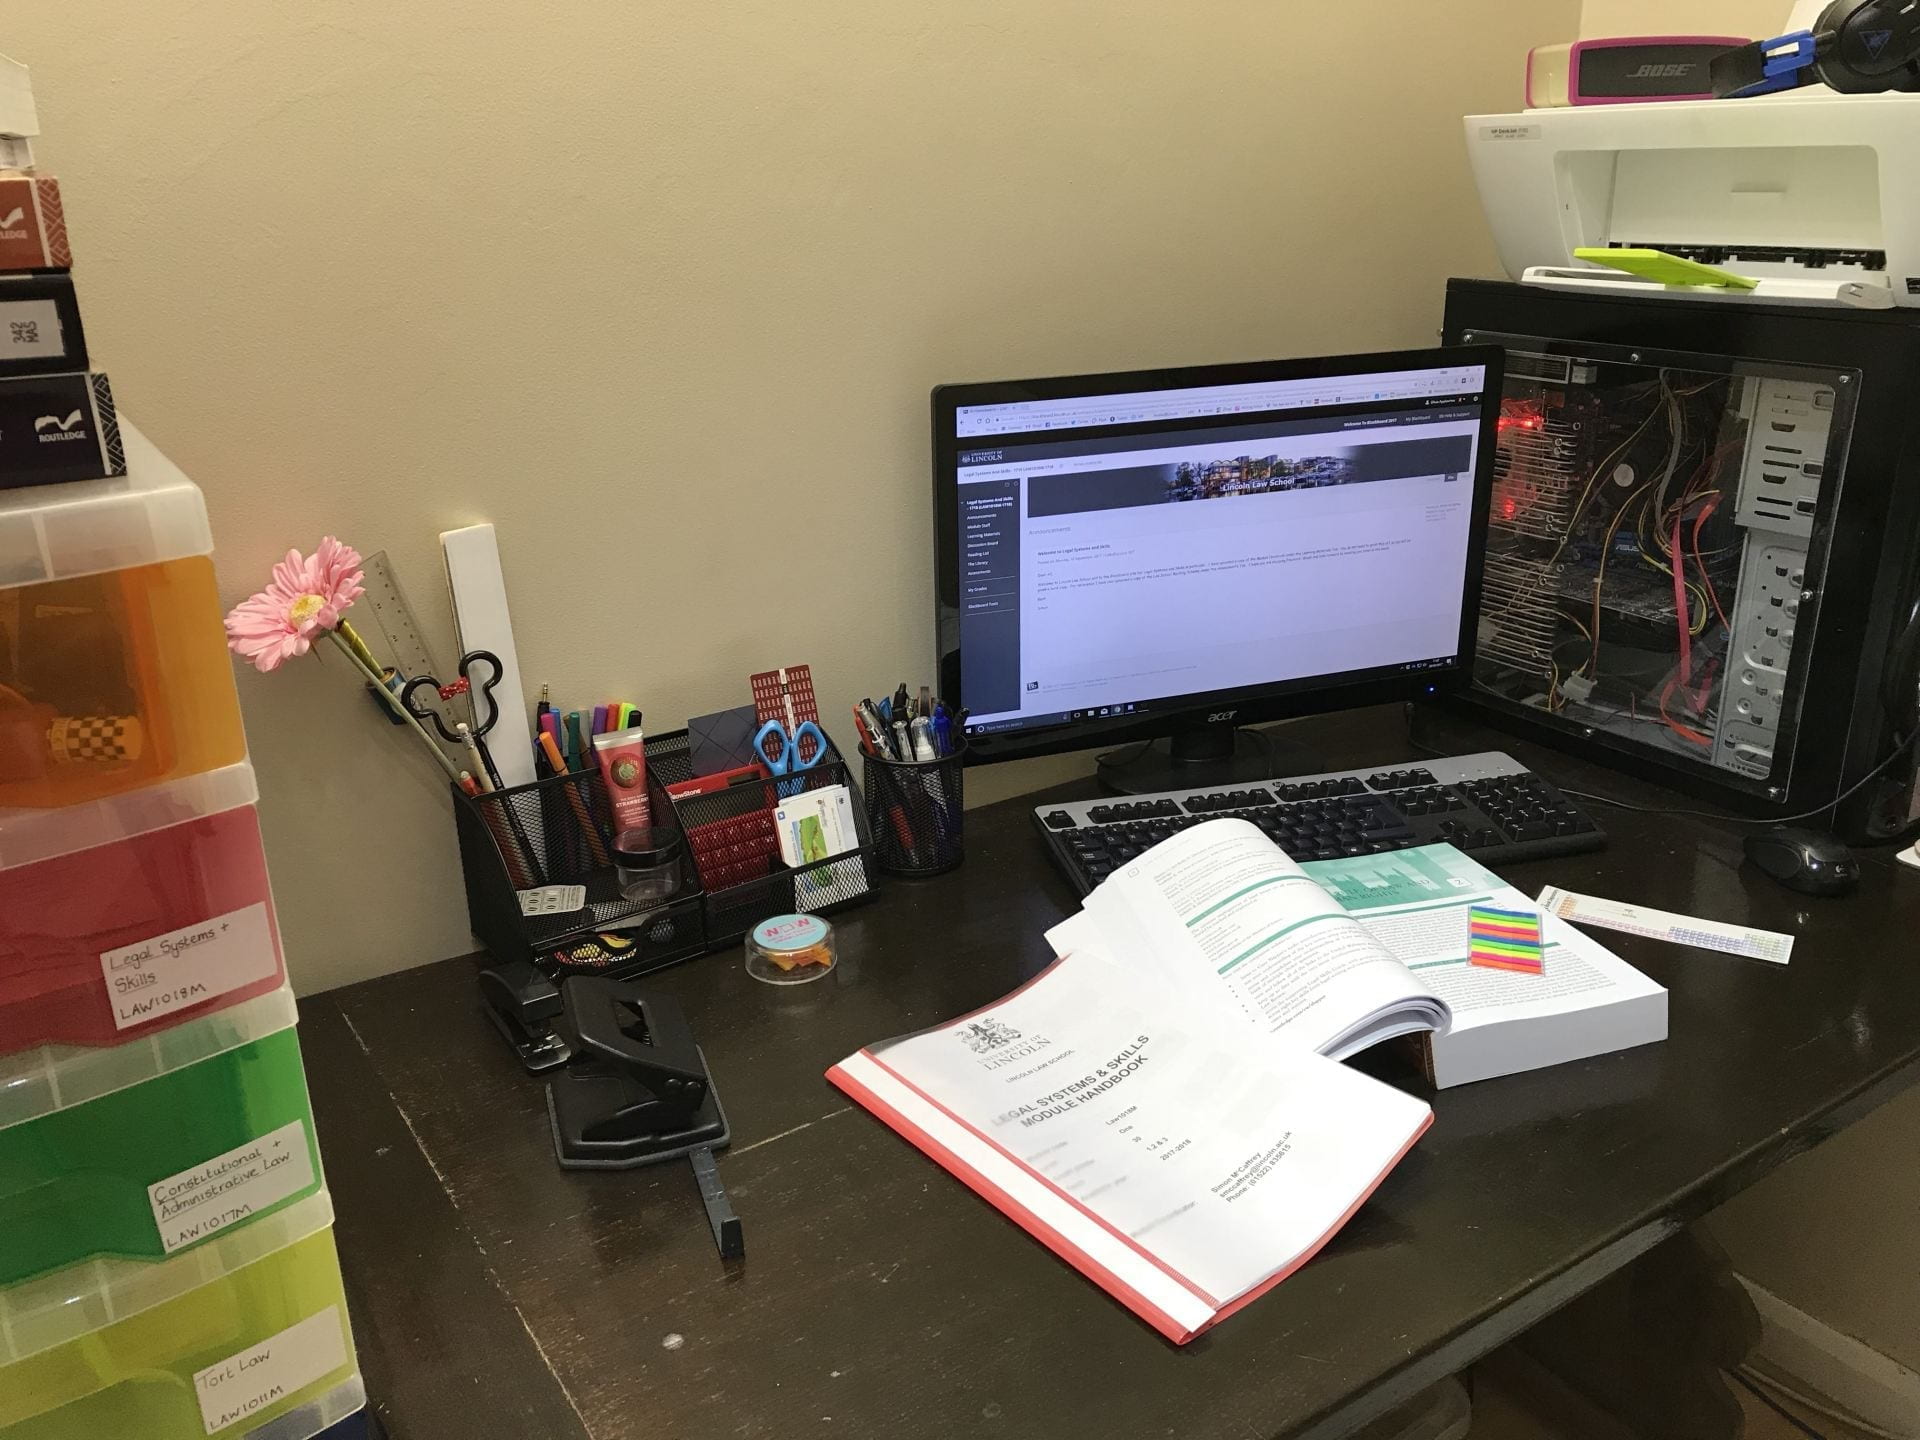 Desk with a computer, stationary and open text books.